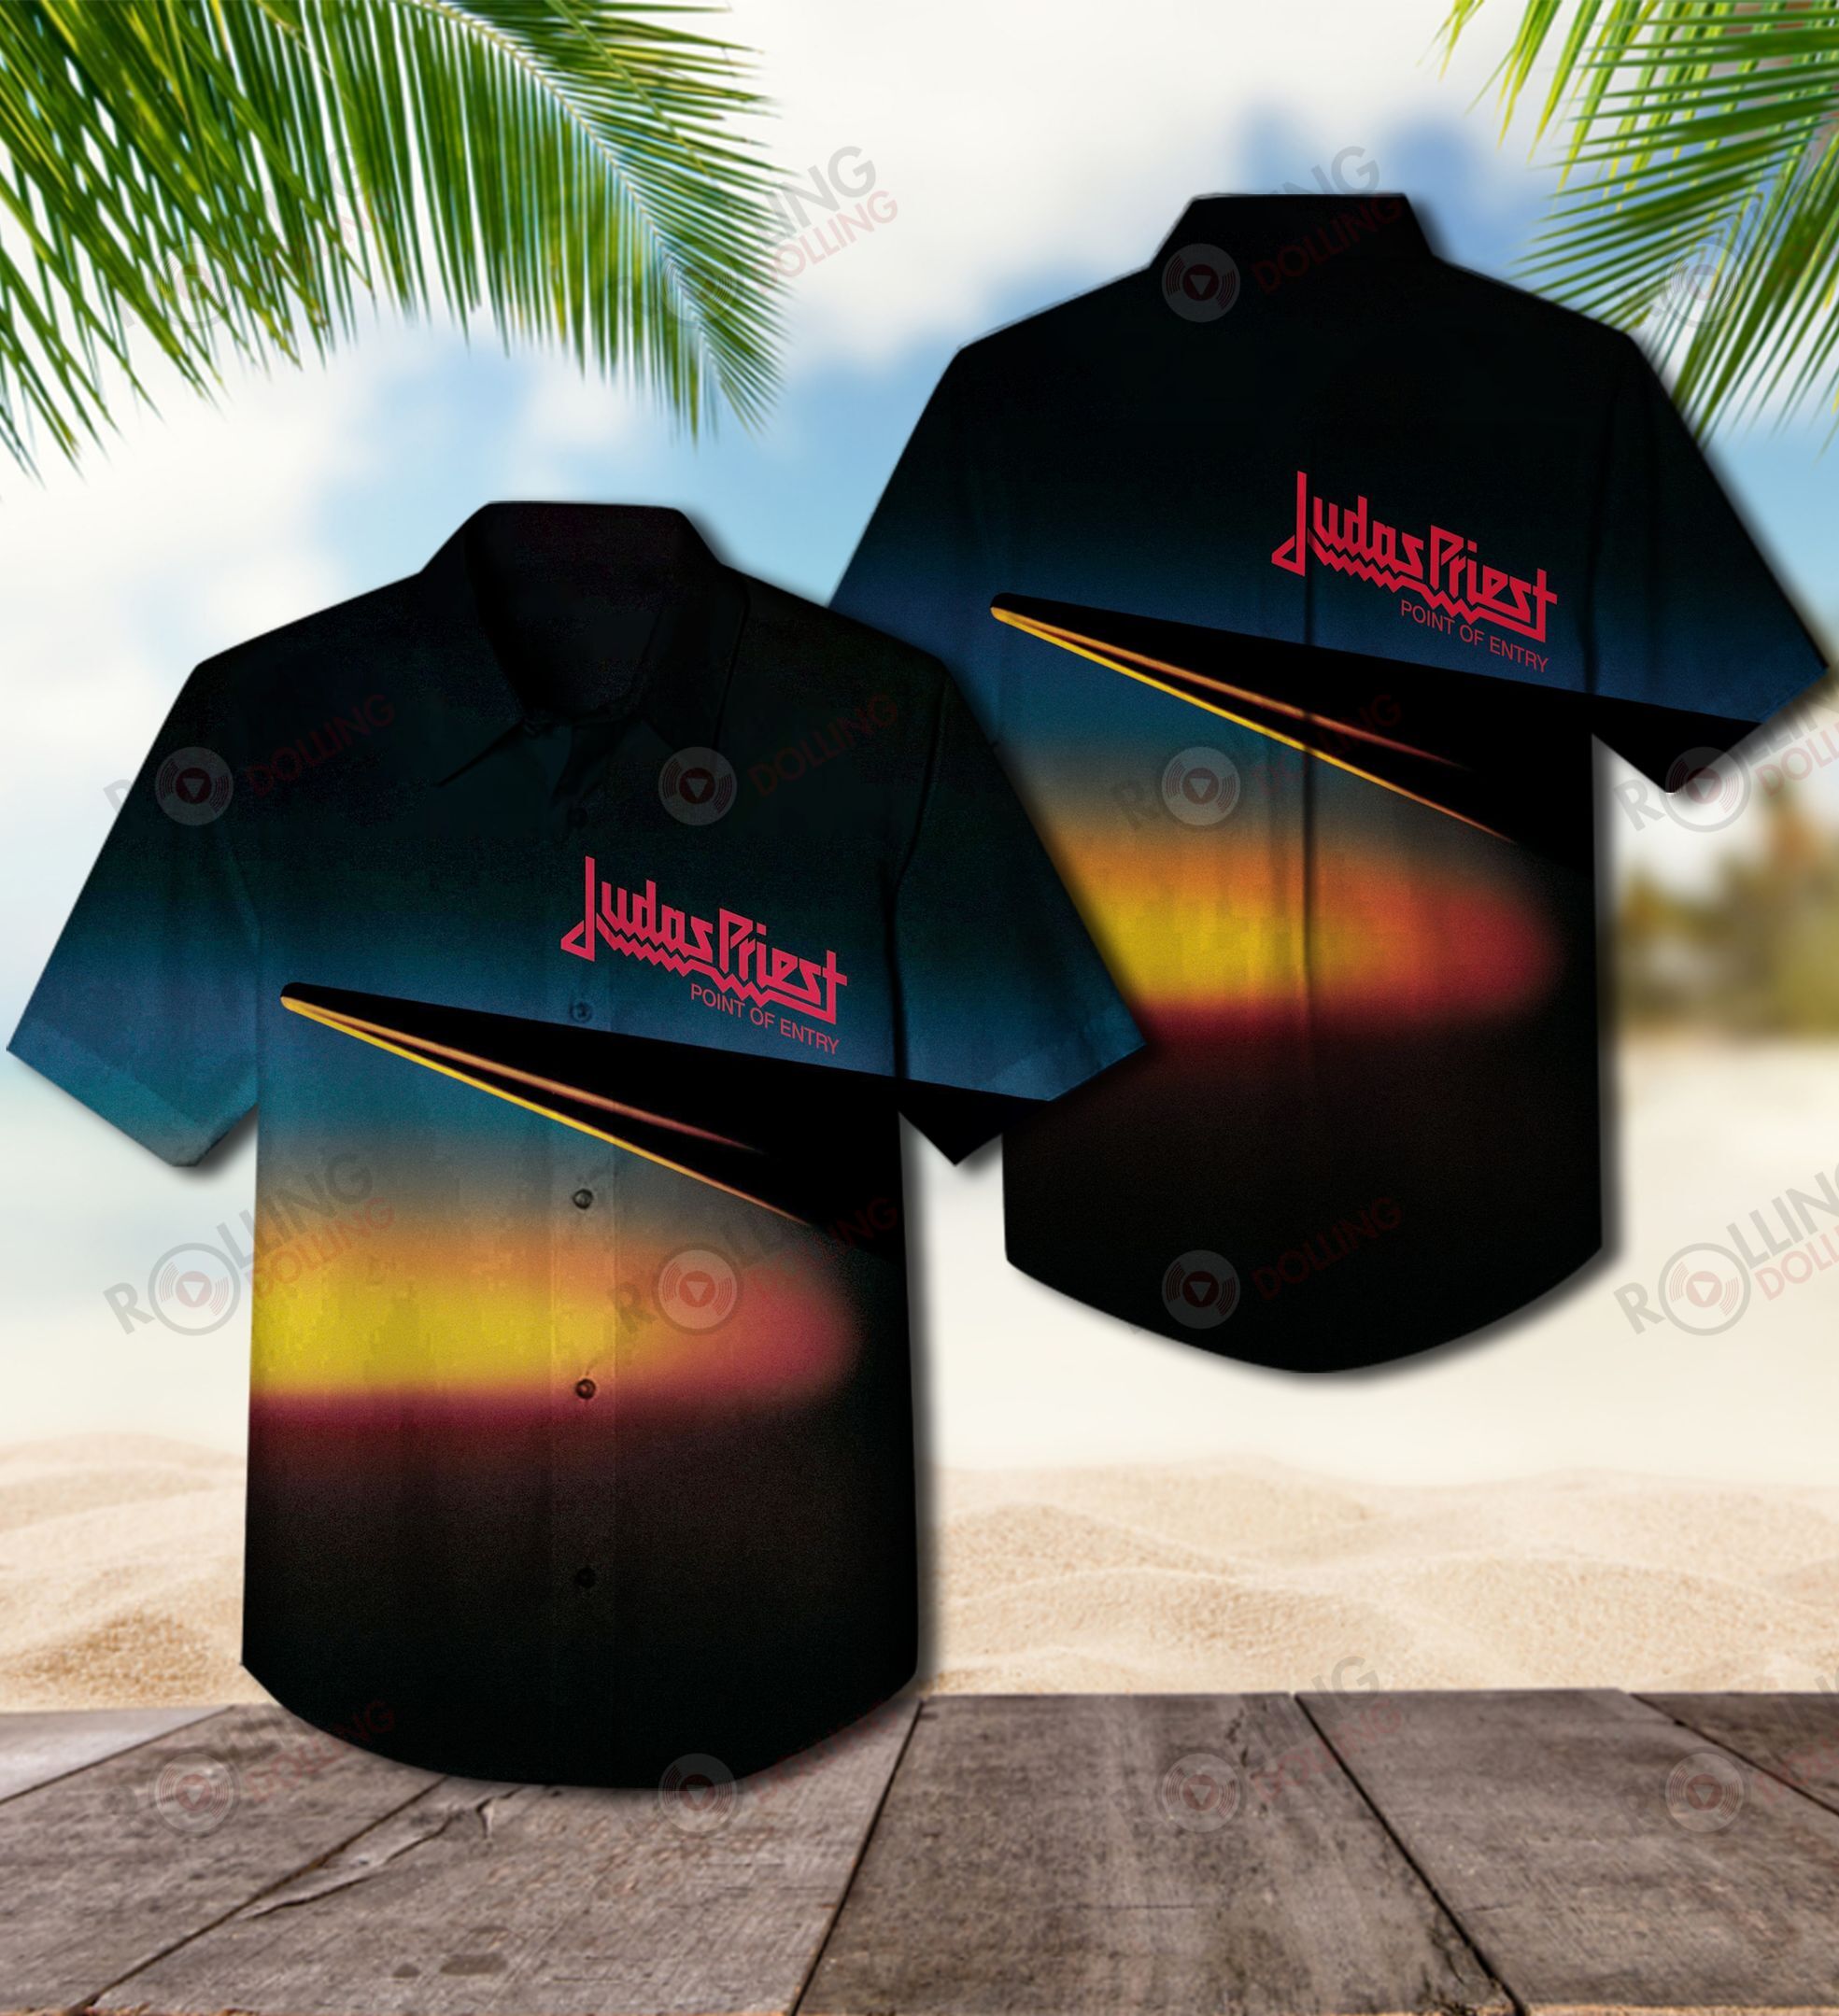 This would make a great gift for any fan who loves Hawaiian Shirt as well as Rock band 117